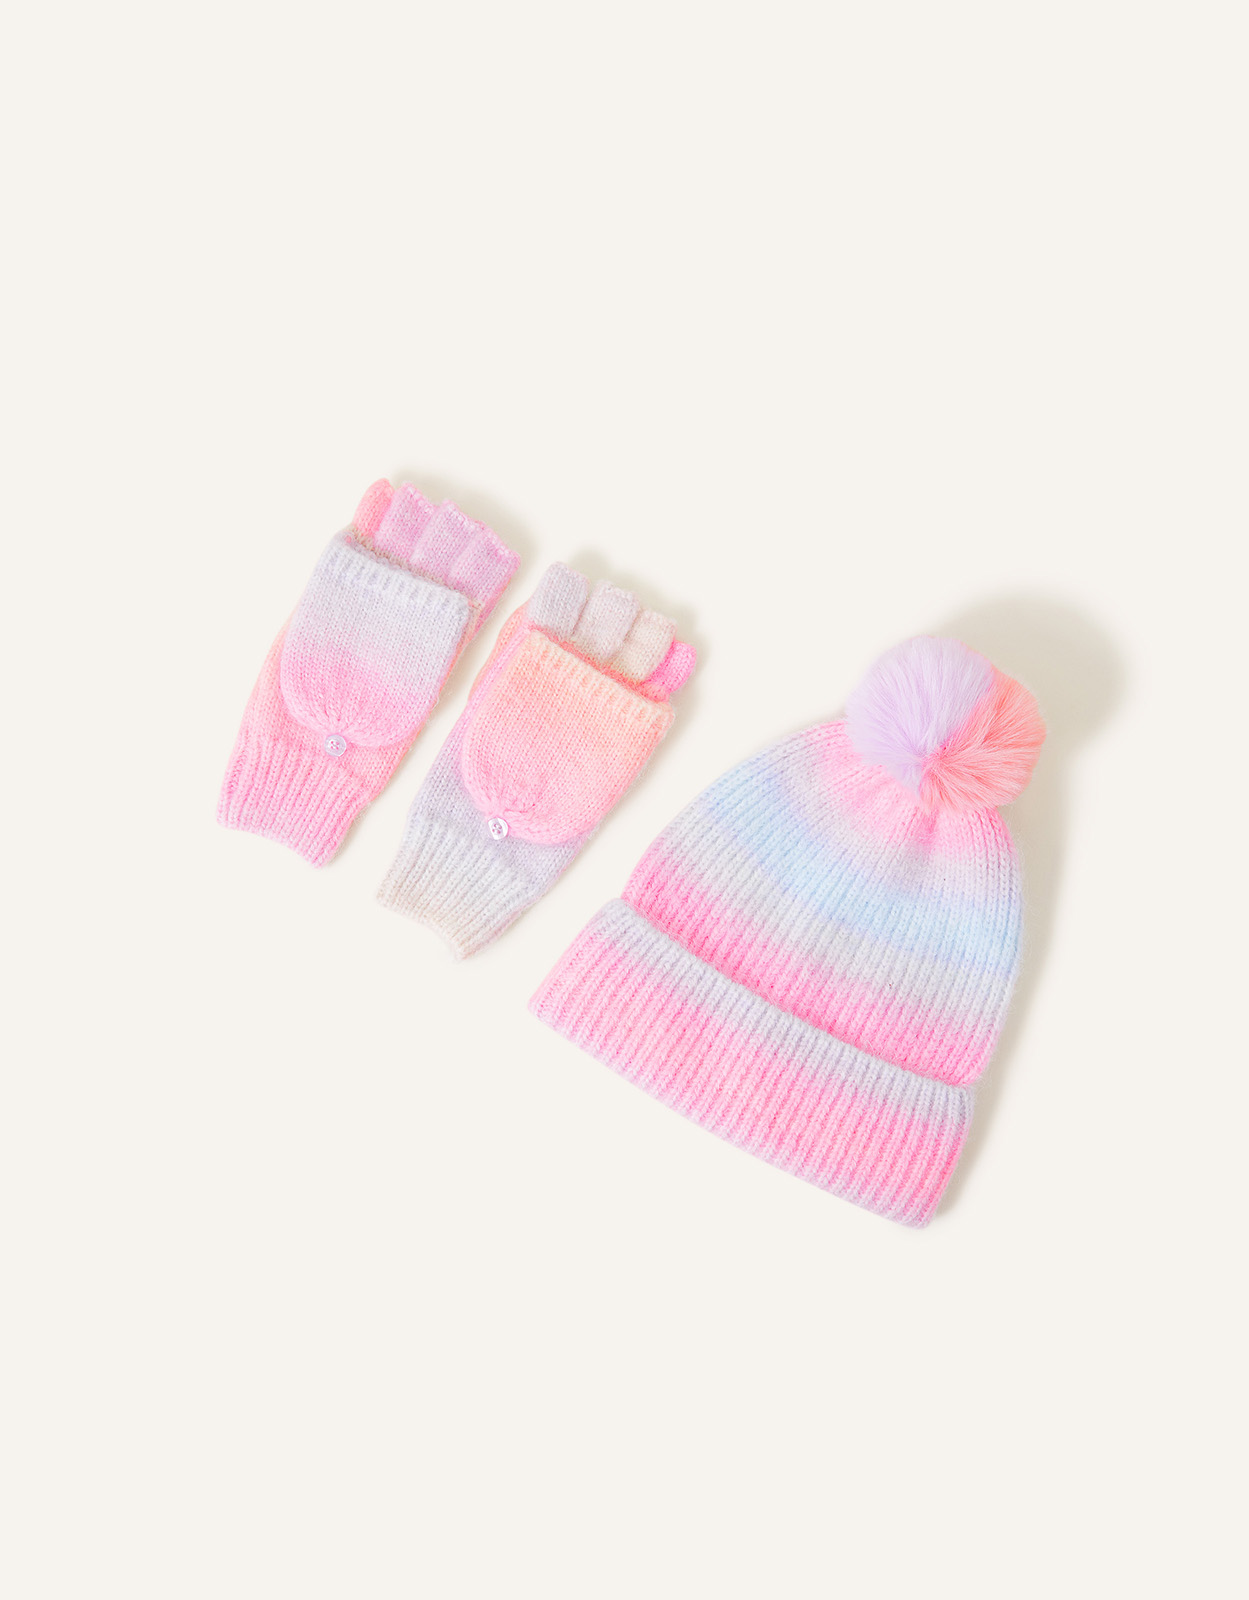 Accessorize Little Girl's Girls Rainbow Hat and Gloves Set Multi, Size: 3-5 yrs